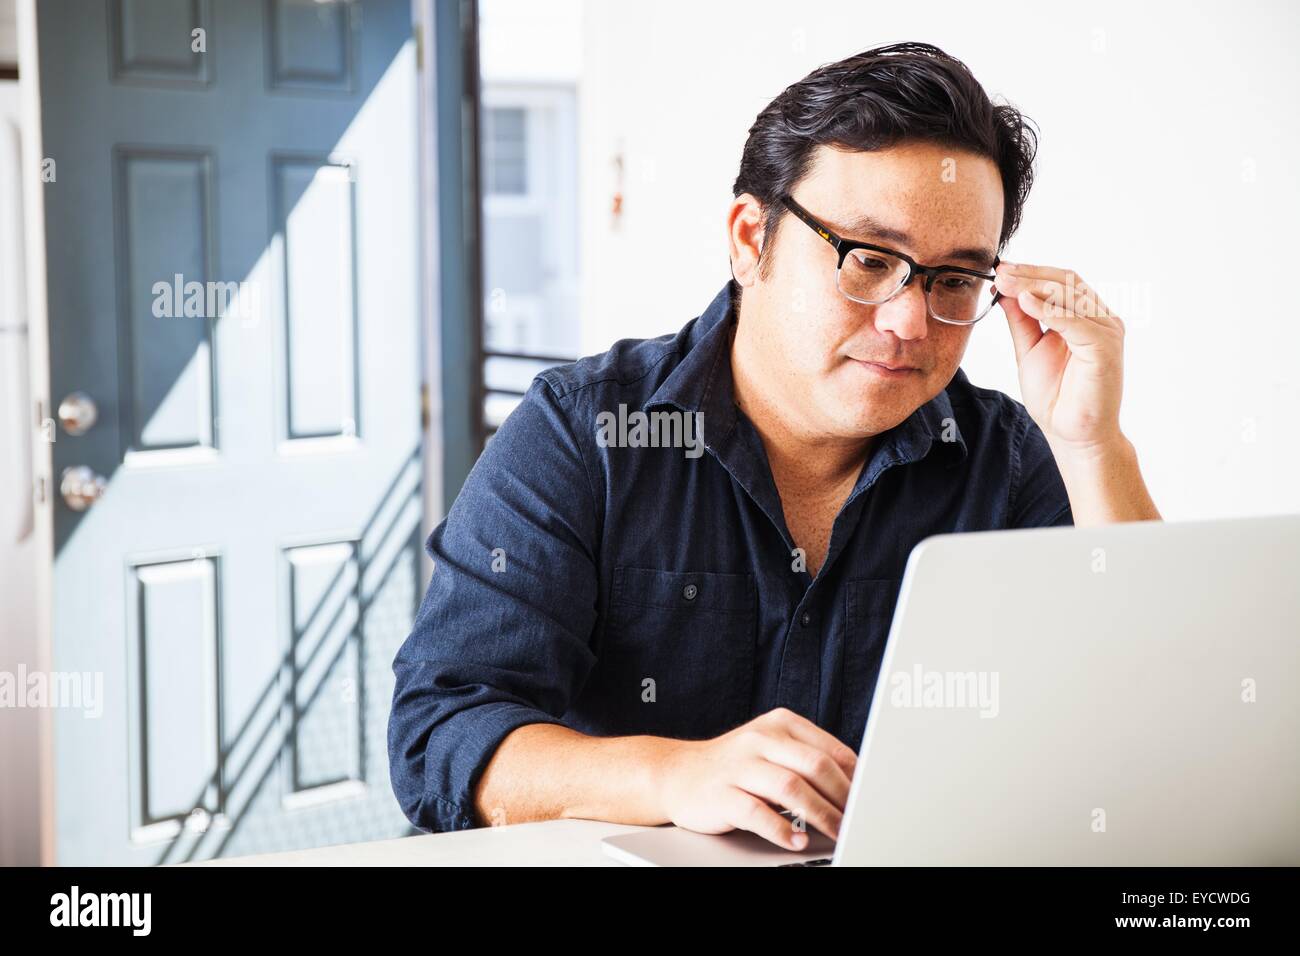 Mature businessman concentrating on laptop in kitchen Stock Photo